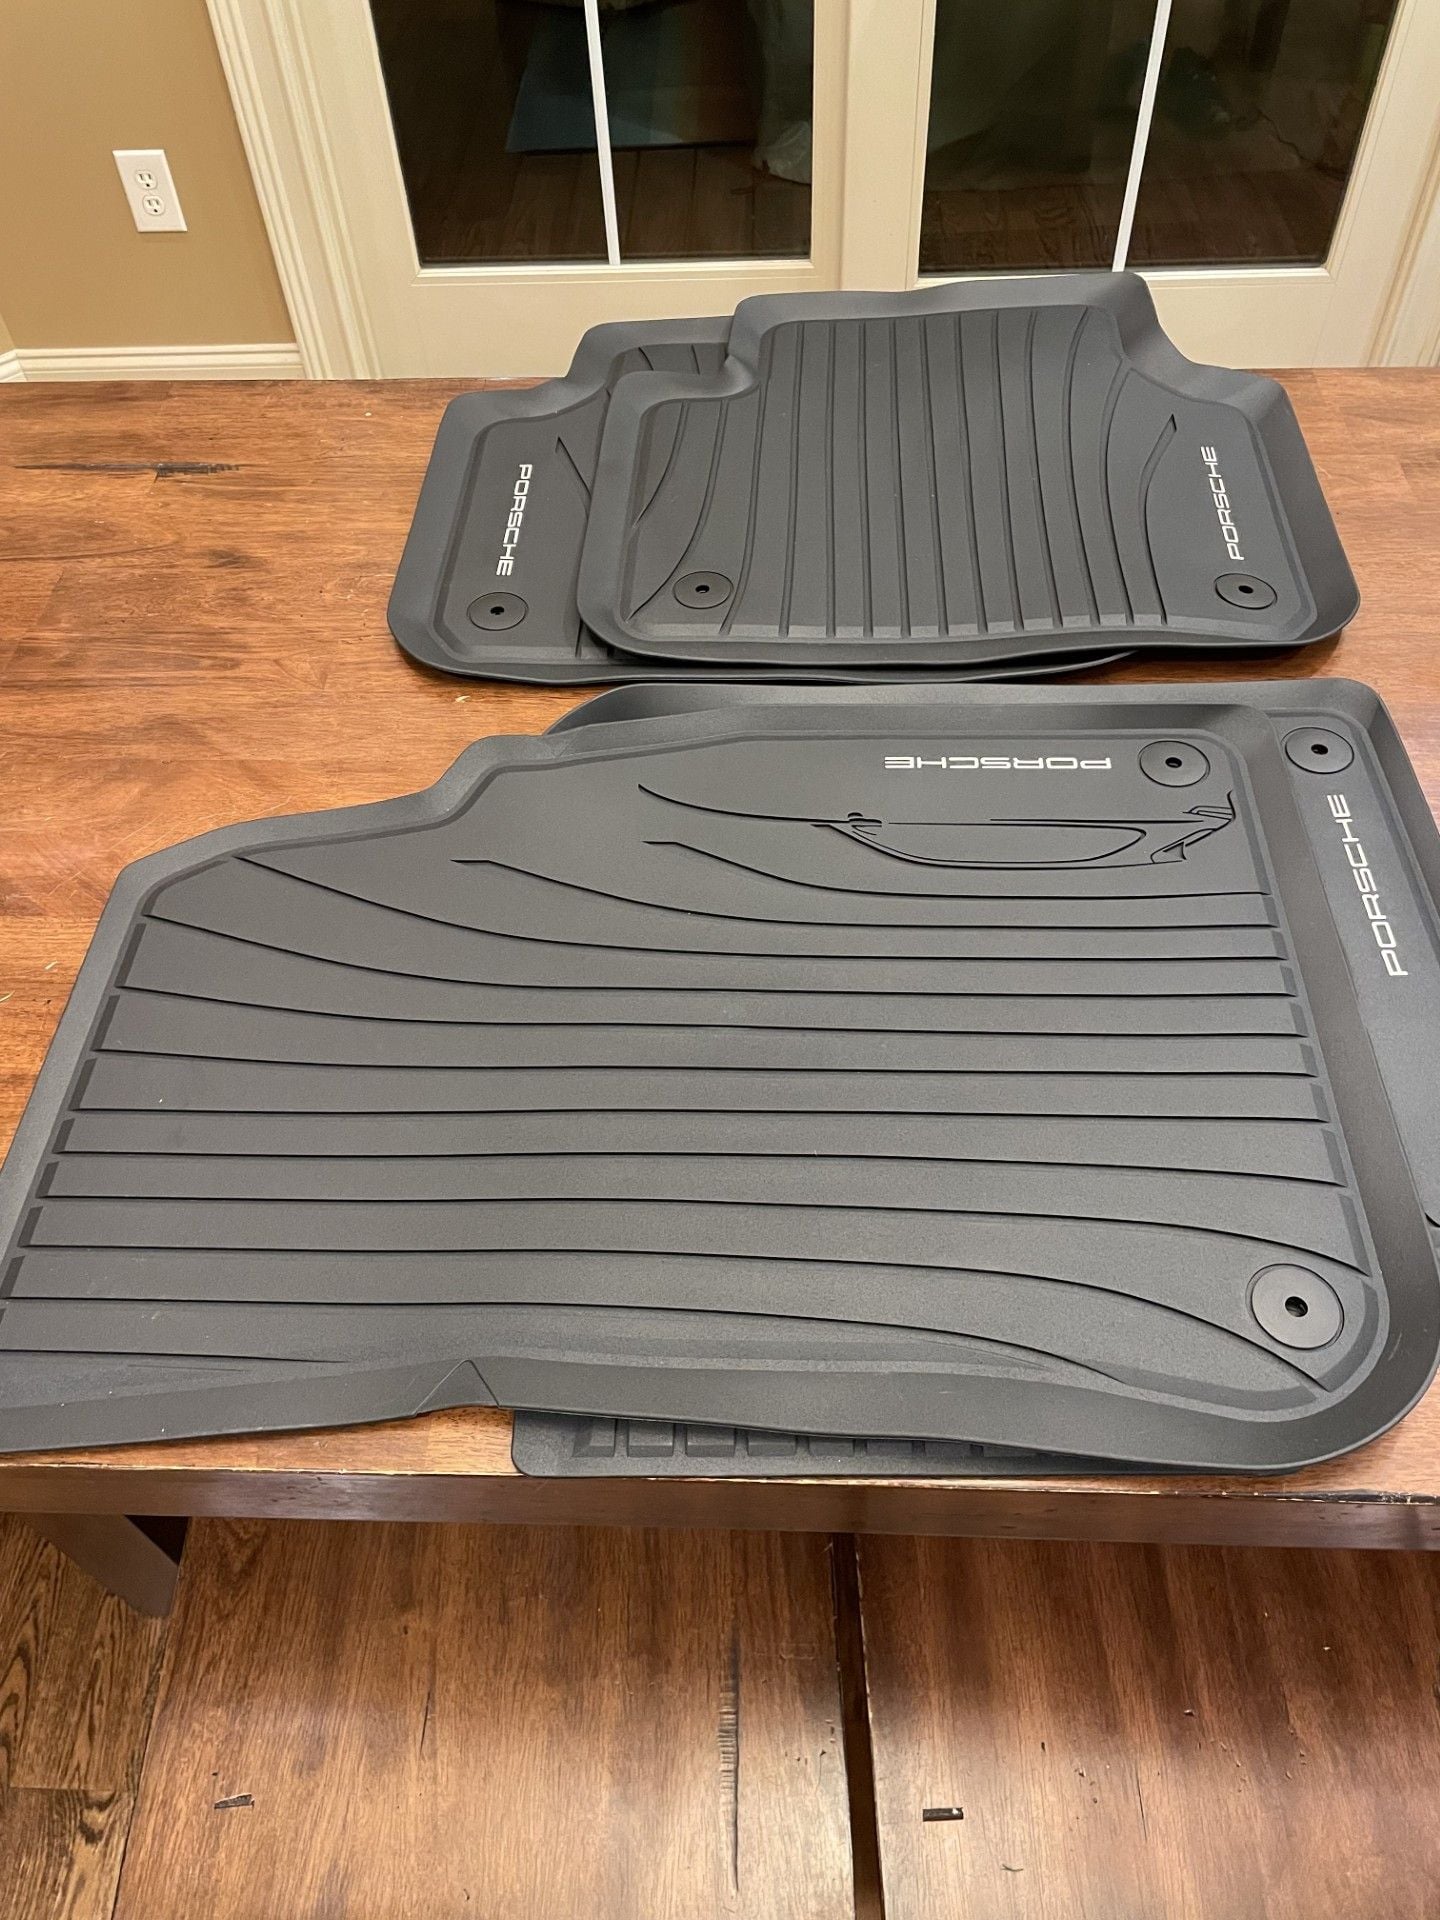 Accessories - New OEM Cayenne 9Y0 Rubber floor mats - New - 2019 to 2023 Porsche Cayenne - Tri Cities, TN 37664, United States